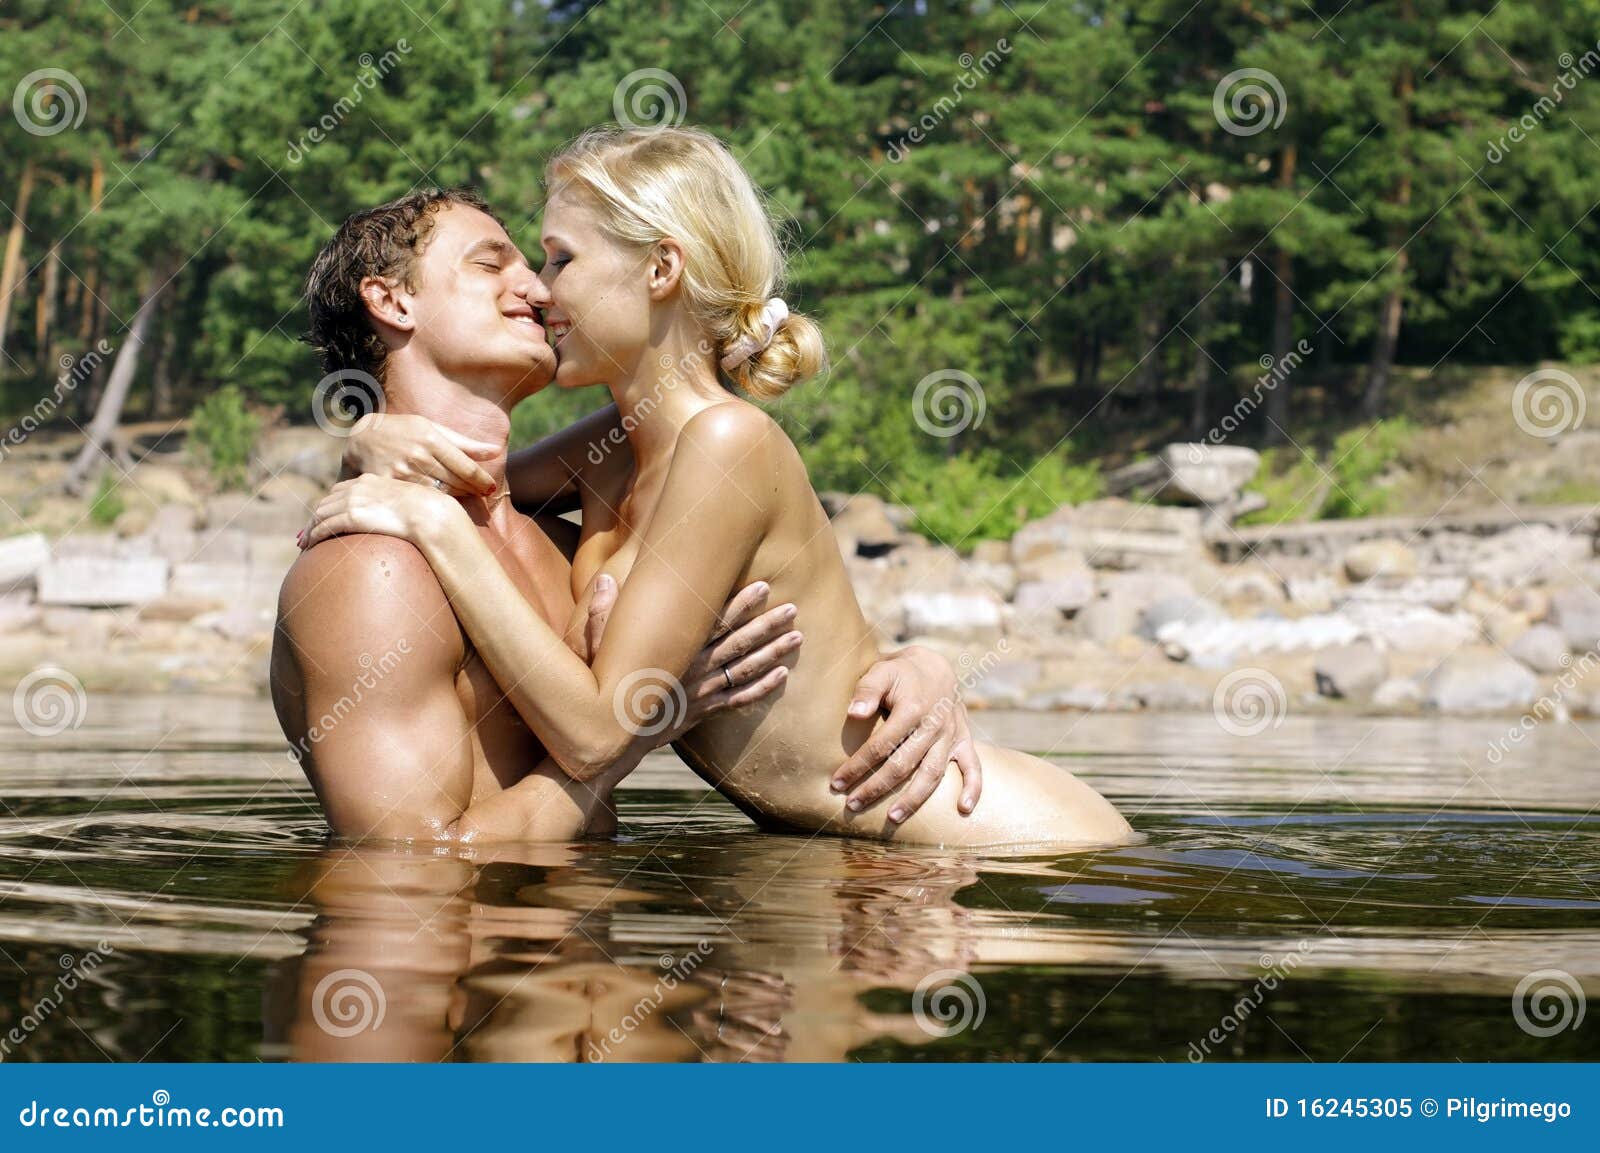 Beach Couple Kissing Naked - Love games on the beach stock image. Image of nude, kissing ...